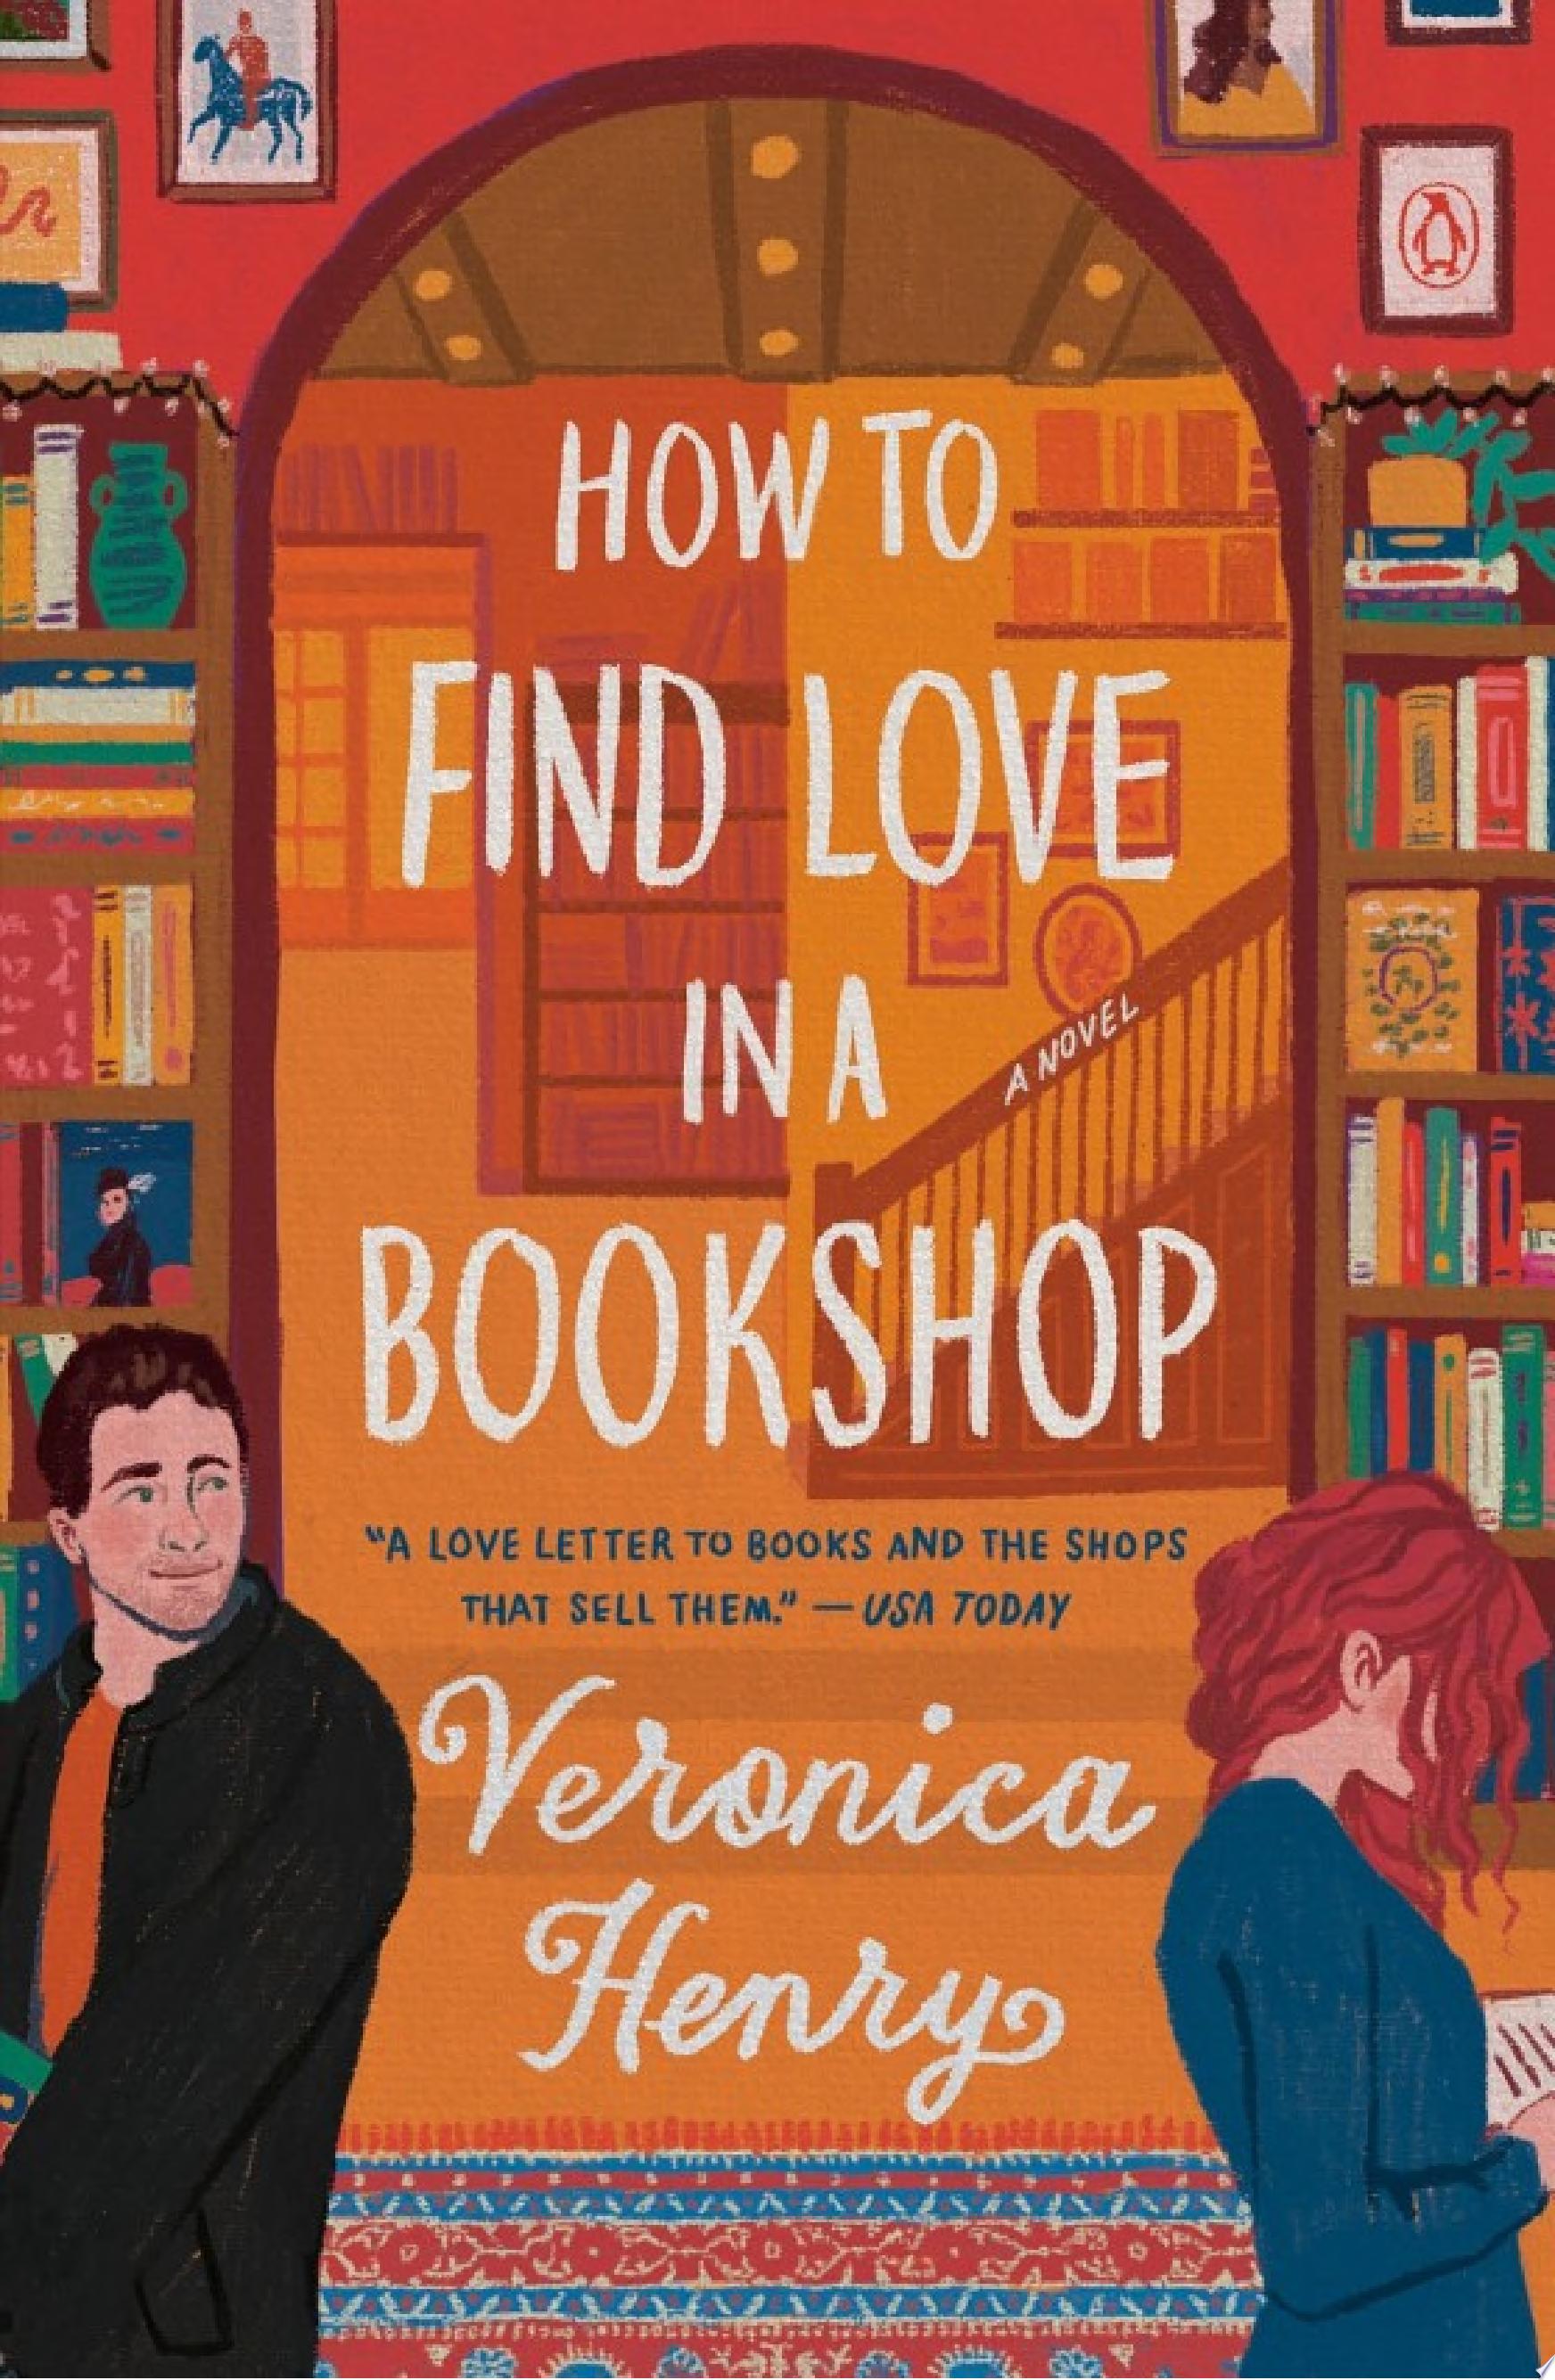 Image for "How to Find Love in a Bookshop"